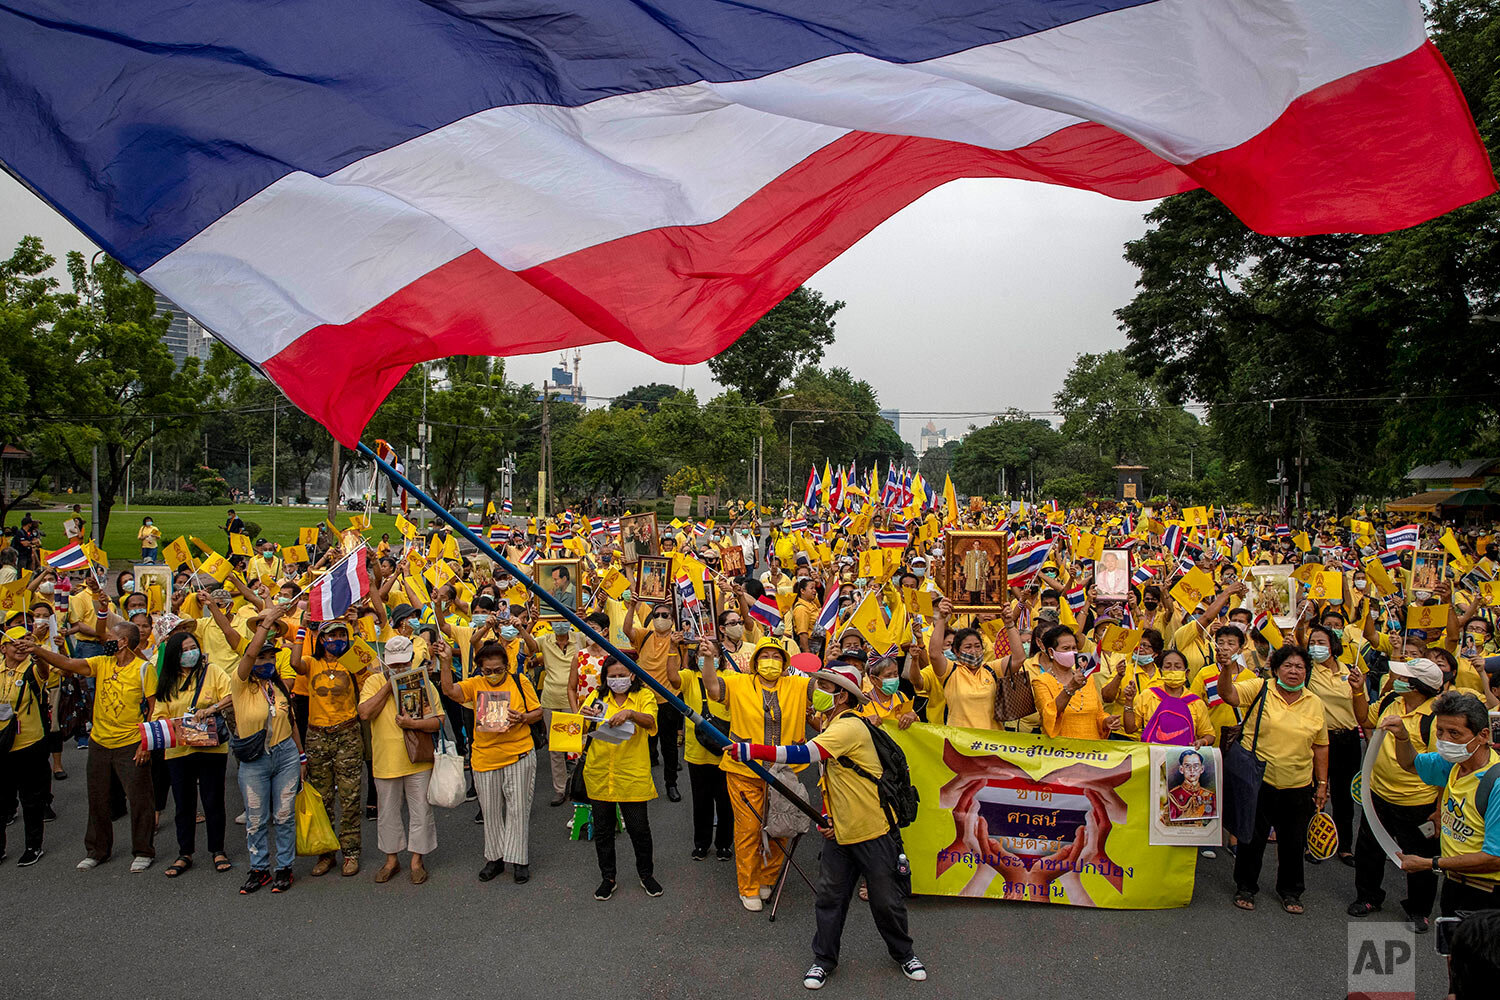  Supporters of the Thai monarchy display images of King Maha Vajiralongkorn, Queen Suthida, late King Bhumibol Adulyadej and wave a giant national flag during a rally at Lumphini park in central Bangkok, Thailand Tuesday, Oct. 27, 2020. (AP Photo/Gem